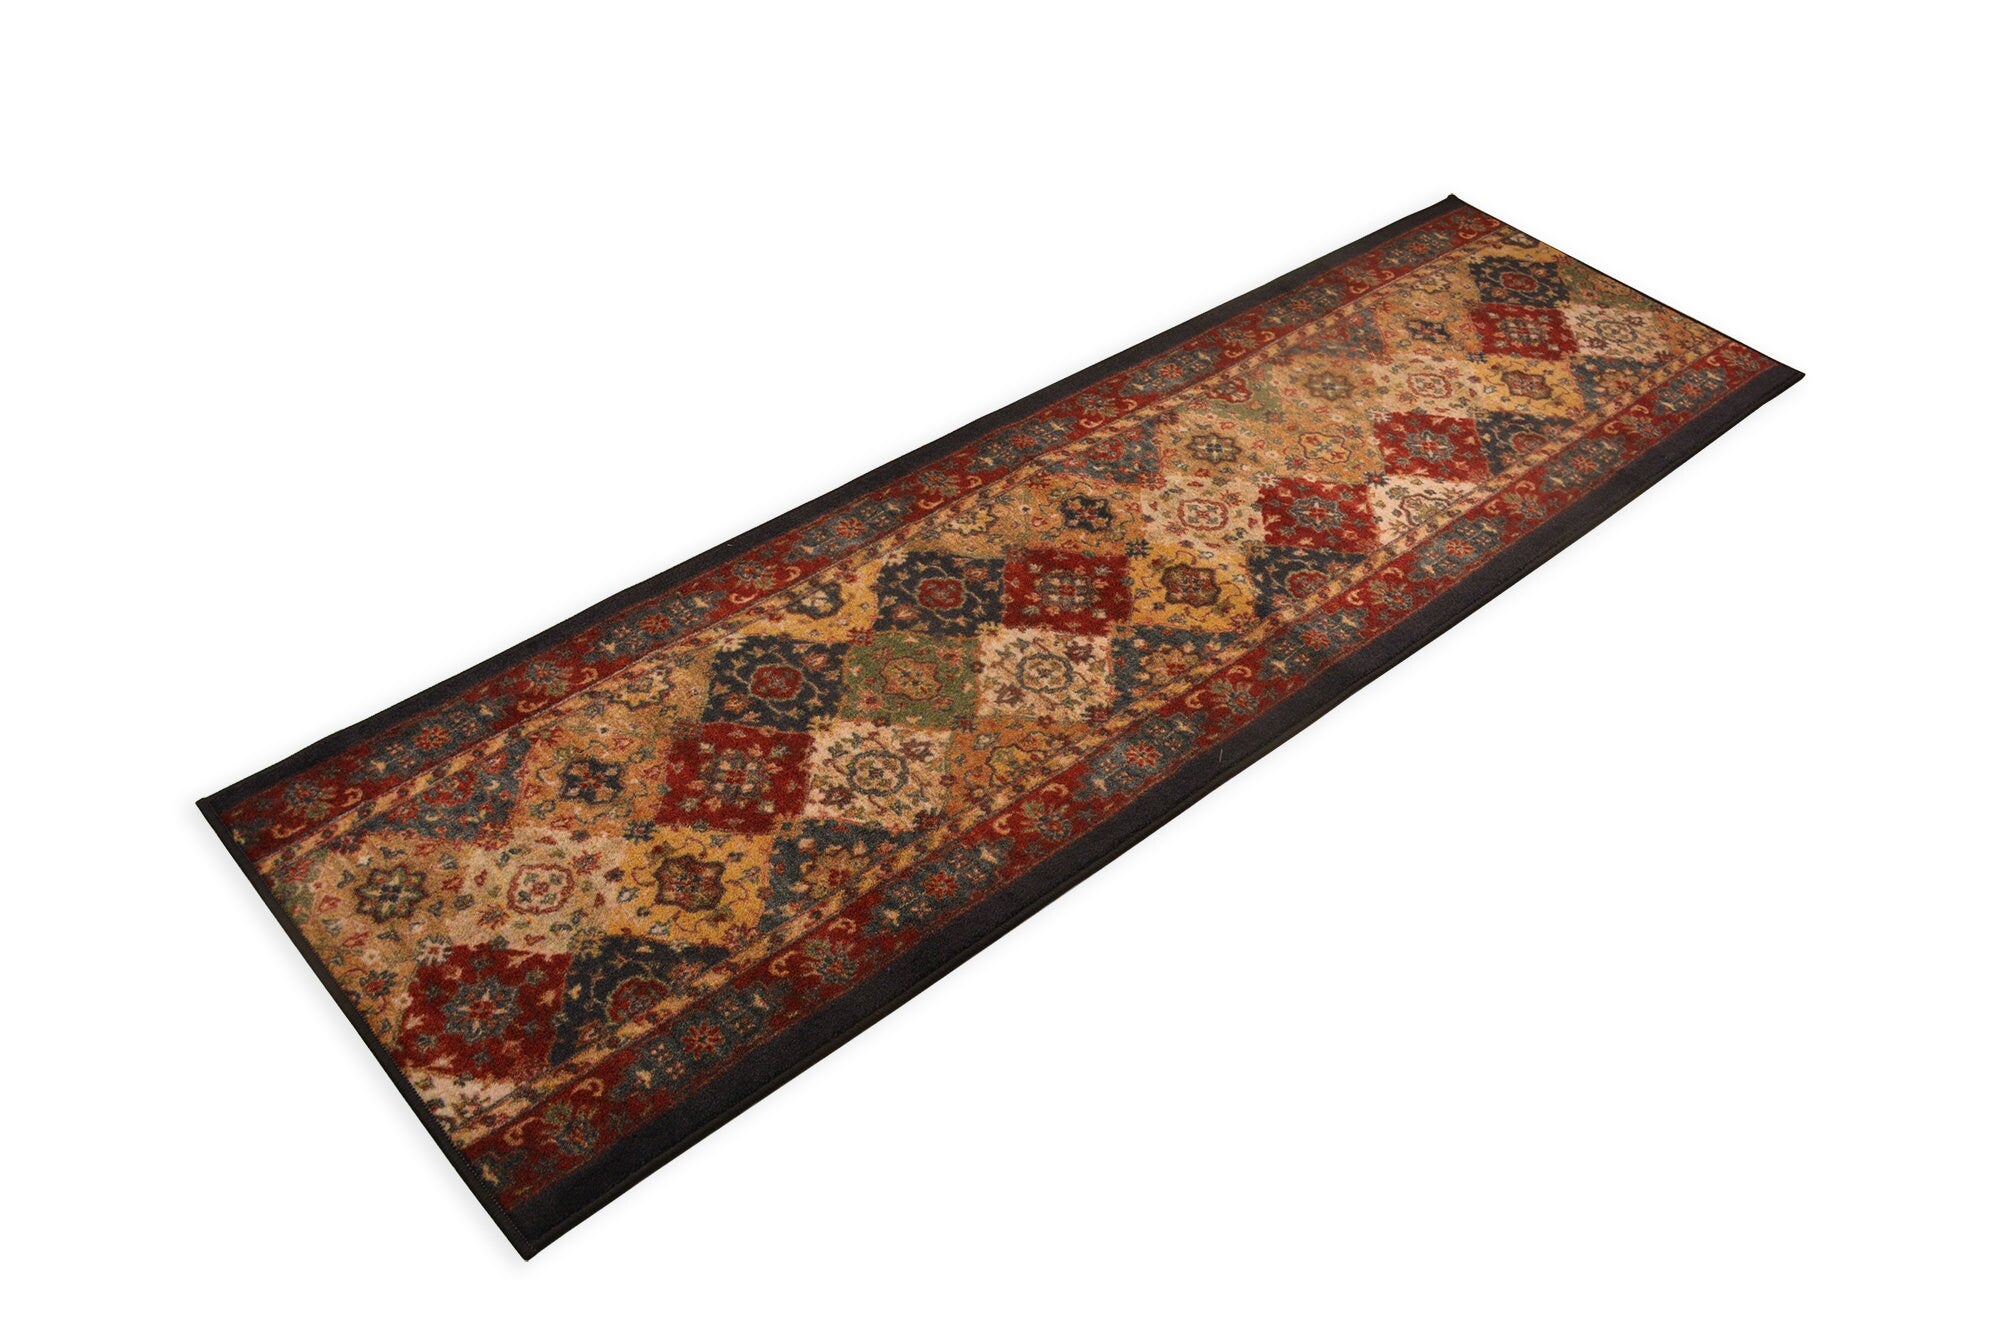 Custom Size Runner Rug Antique Oriental Bakhtiari Persian Design, Canvas Backing Pick Your Own Size By Up to 50 Ft, 26" or 35" Wide-9